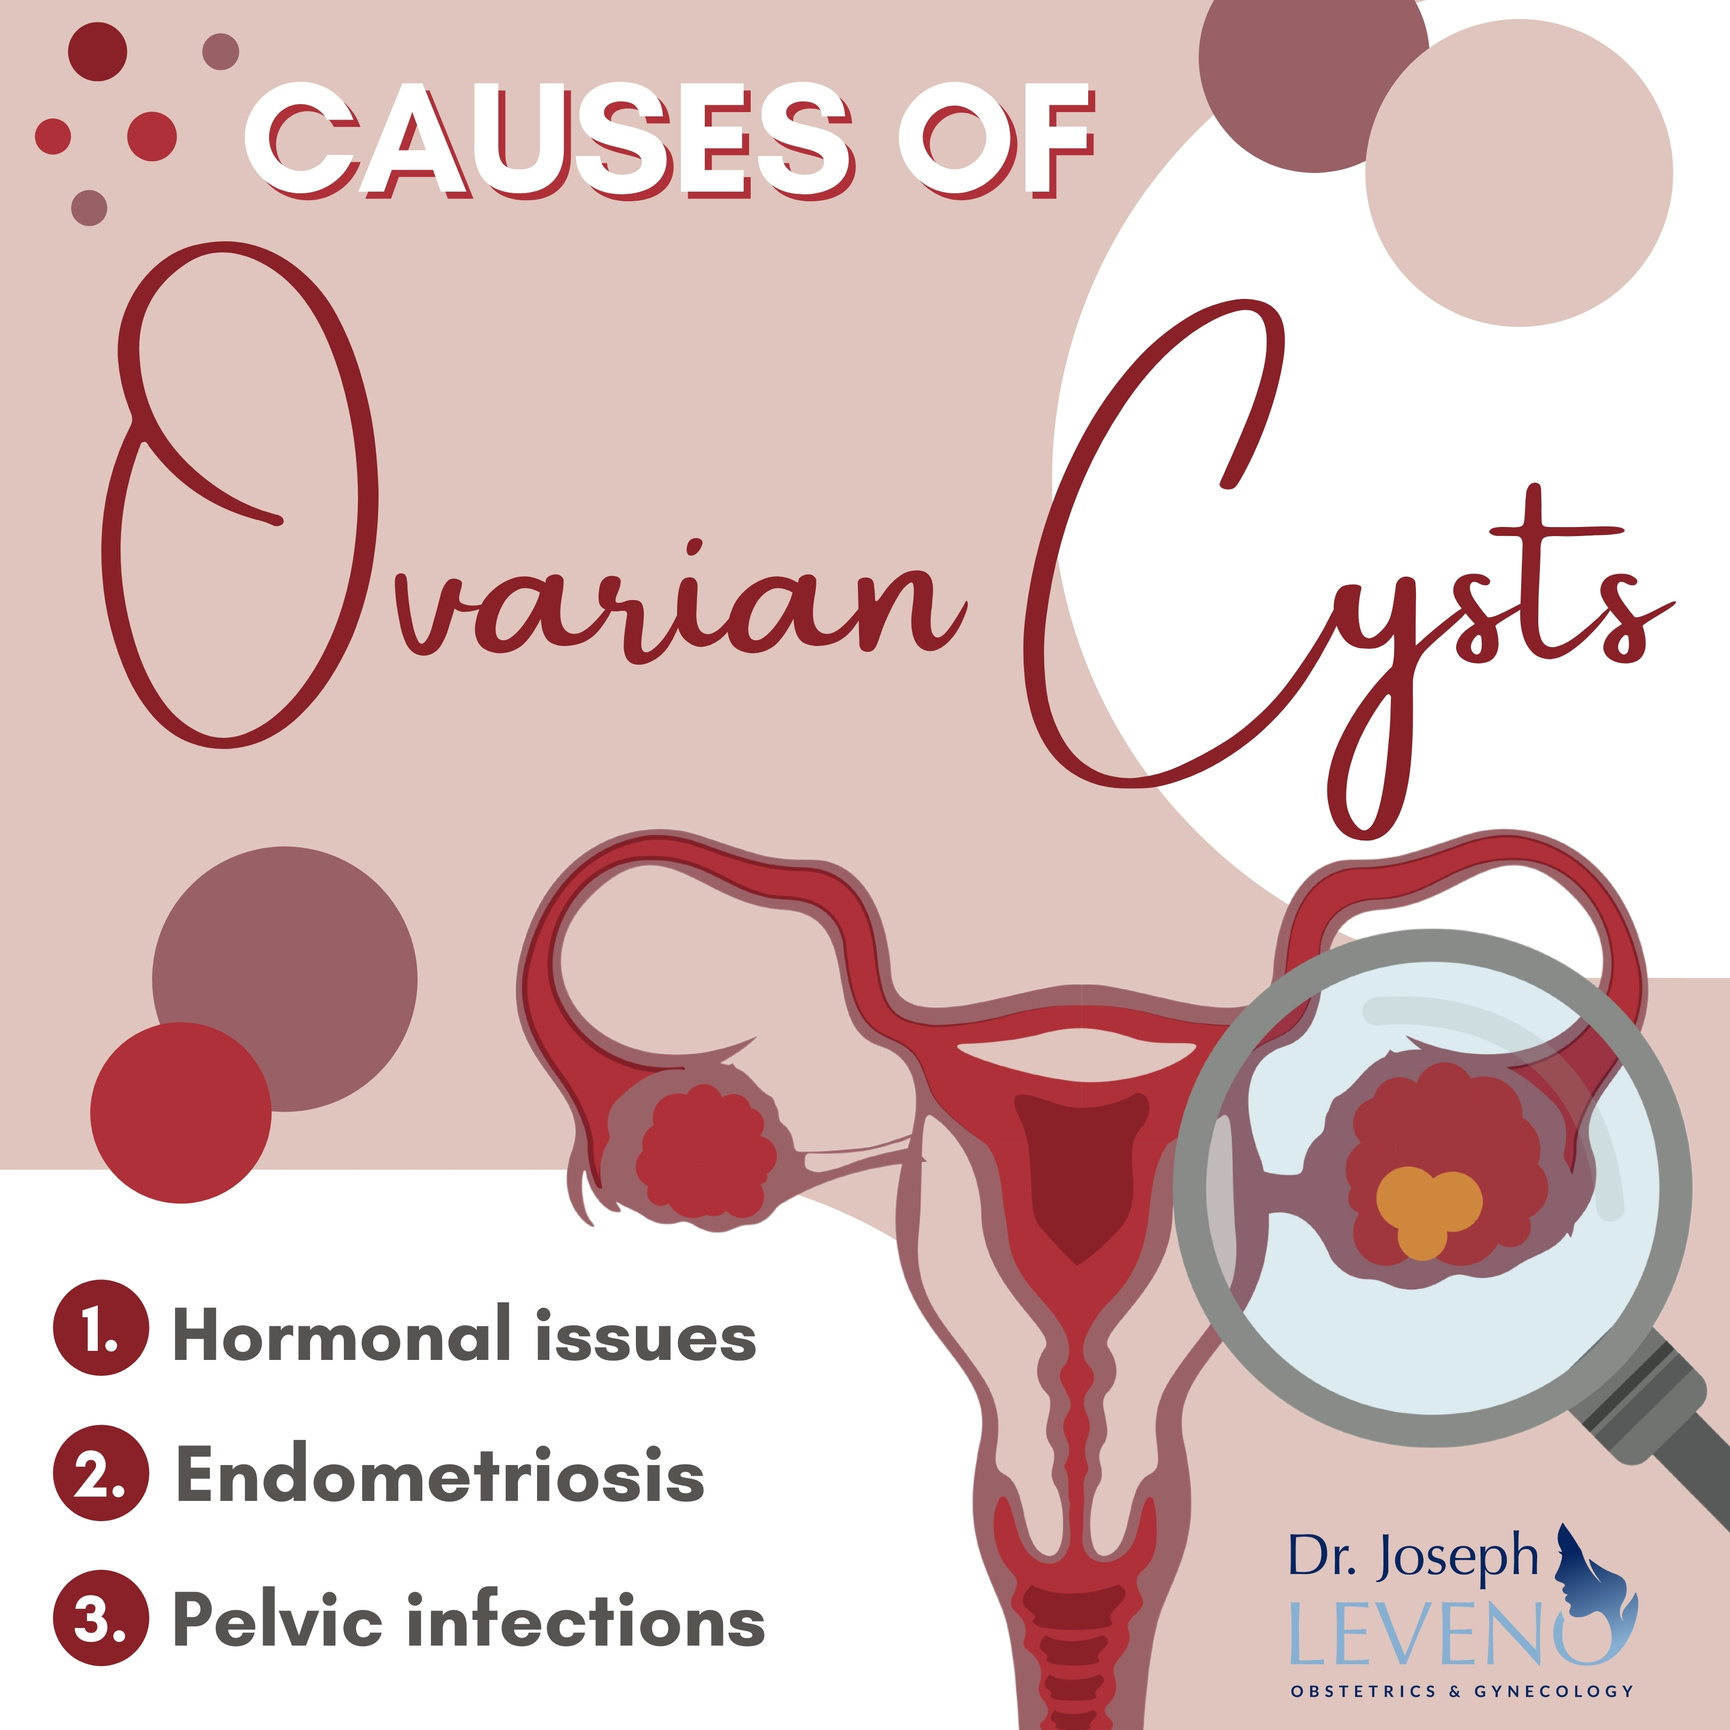 Causes-Of-Ovarian-Cysts-Women's-Health - Dr. Joseph Leveno